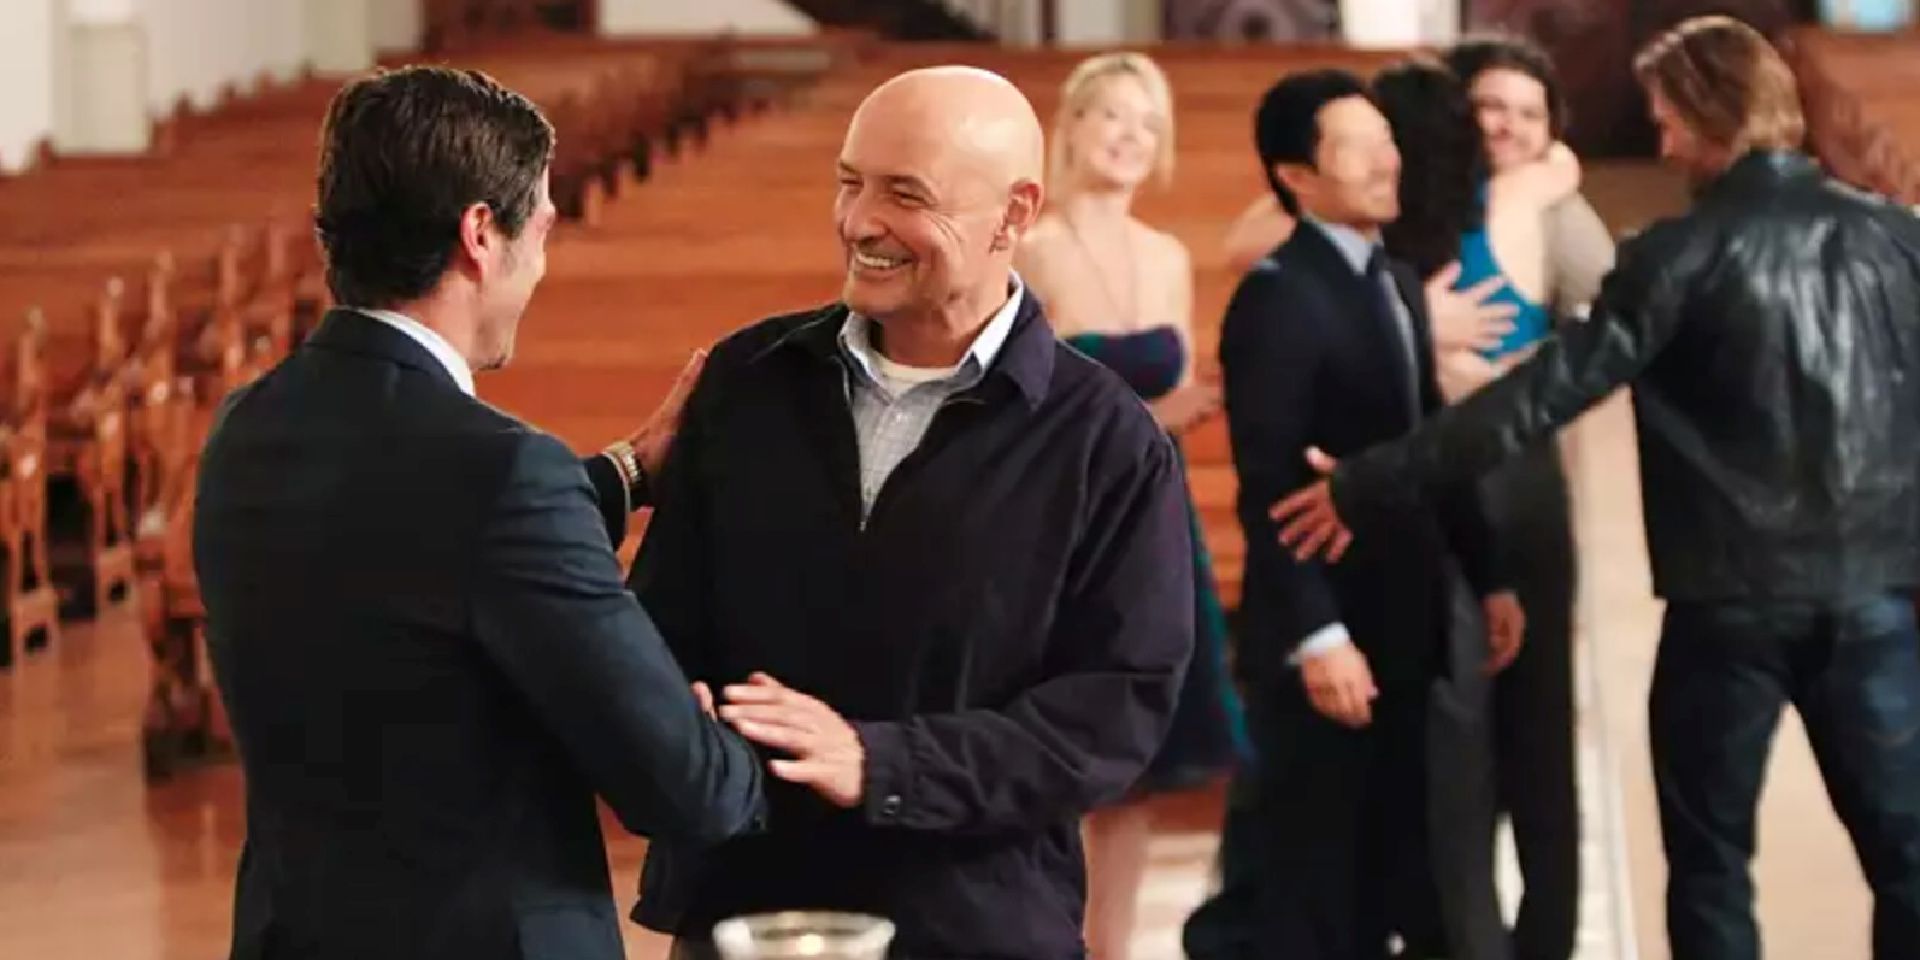 Jack and Locke shake hands as they join the others in the church in the Lost finale